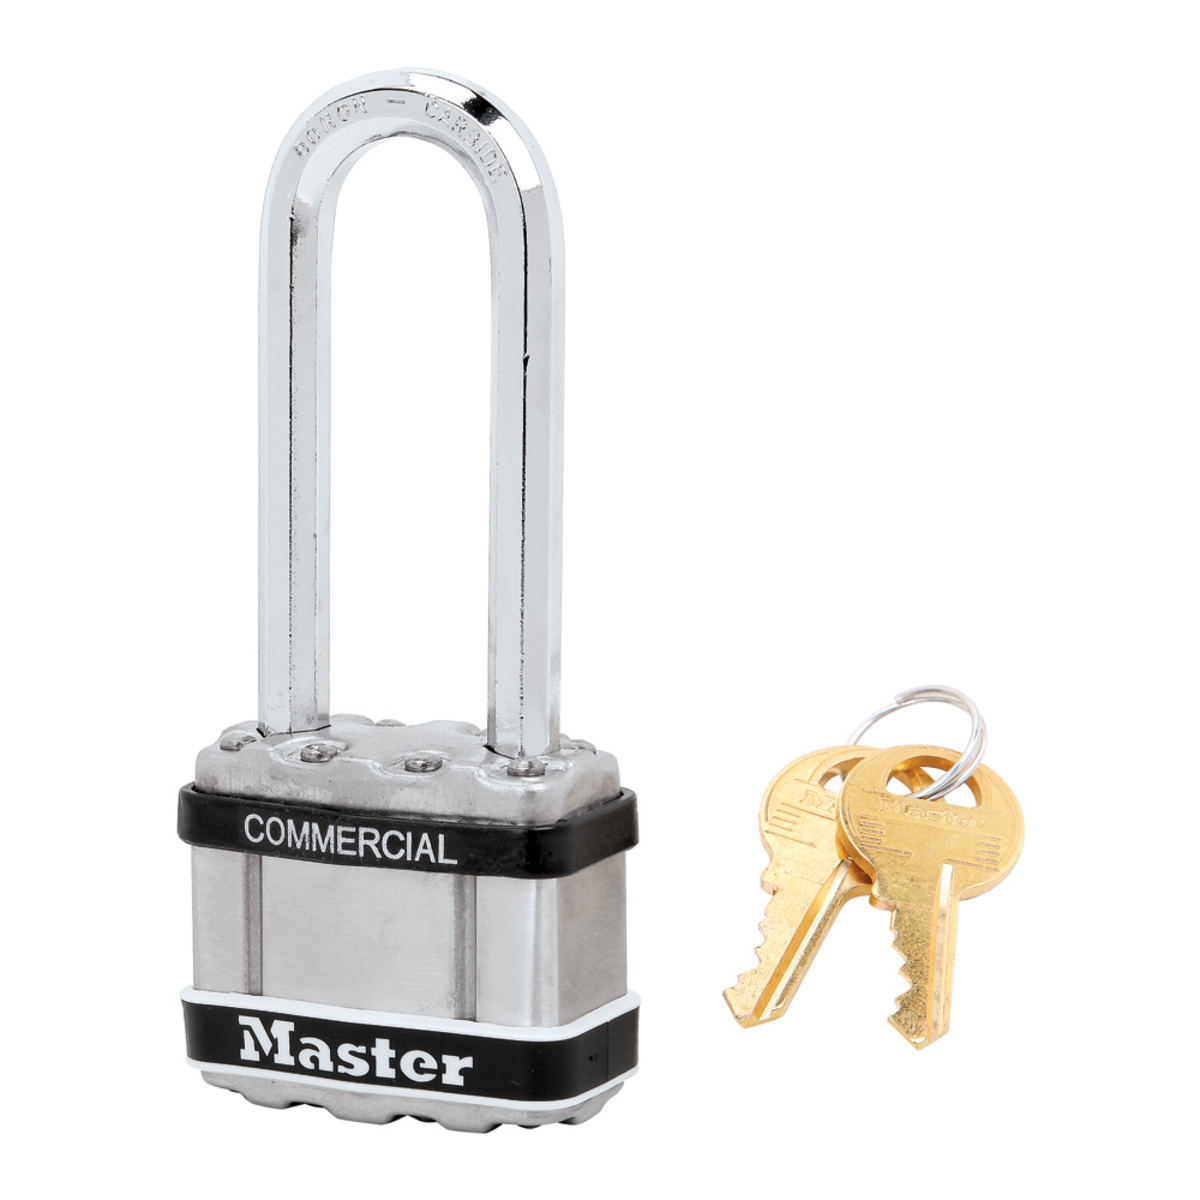 Master Lock® Silver Stainless Steel General Security Padlock Boron Carbide Shackle